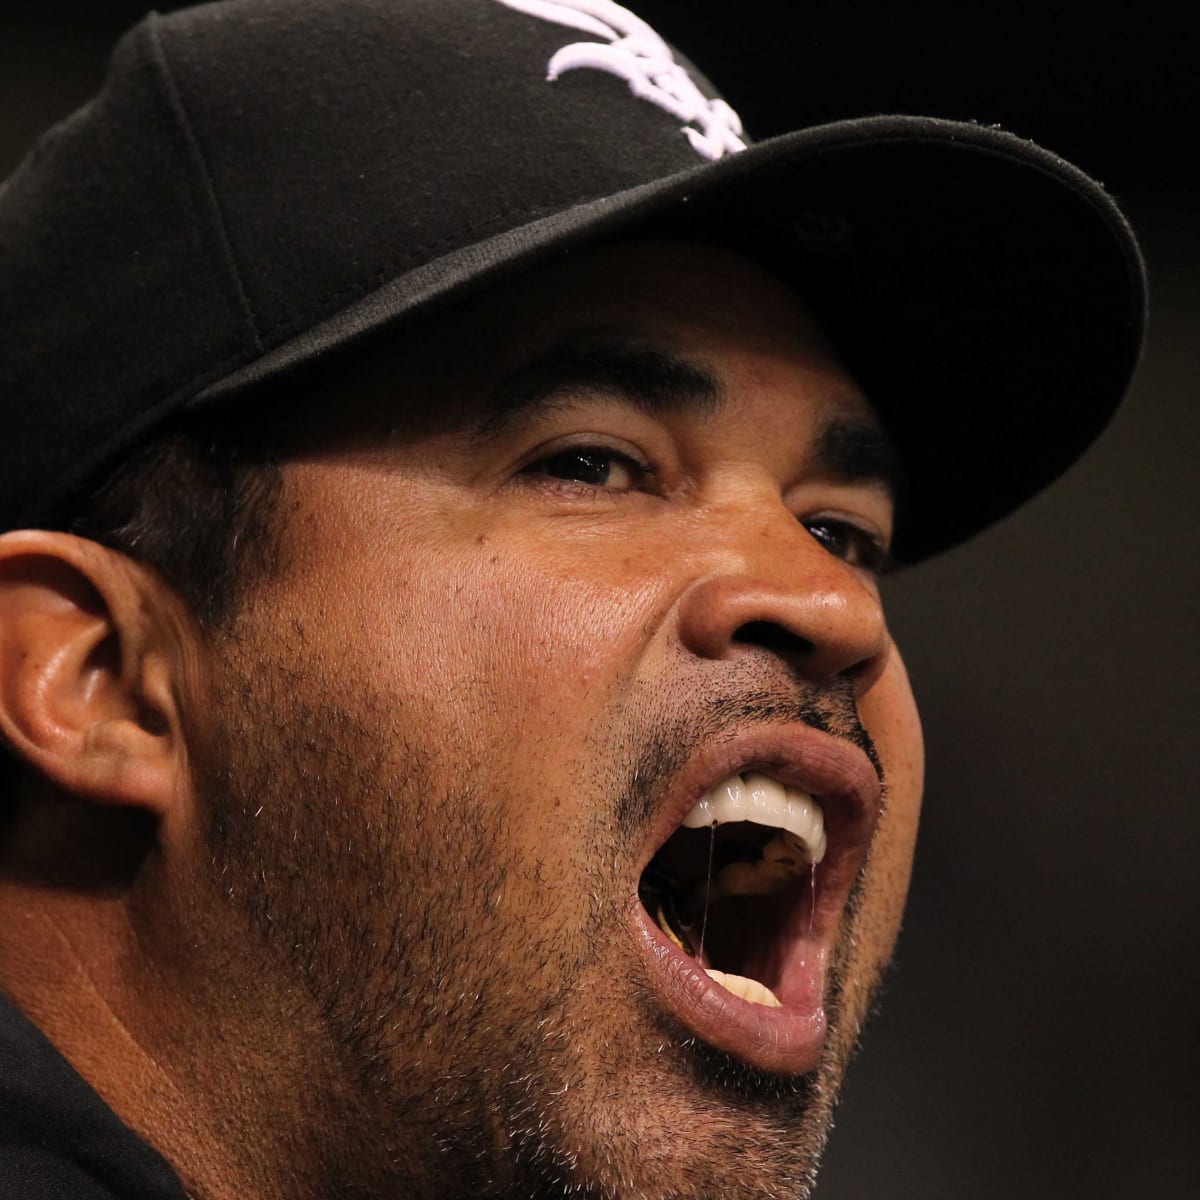 Ozzie Guillen's Controversial Comments - Sports Illustrated